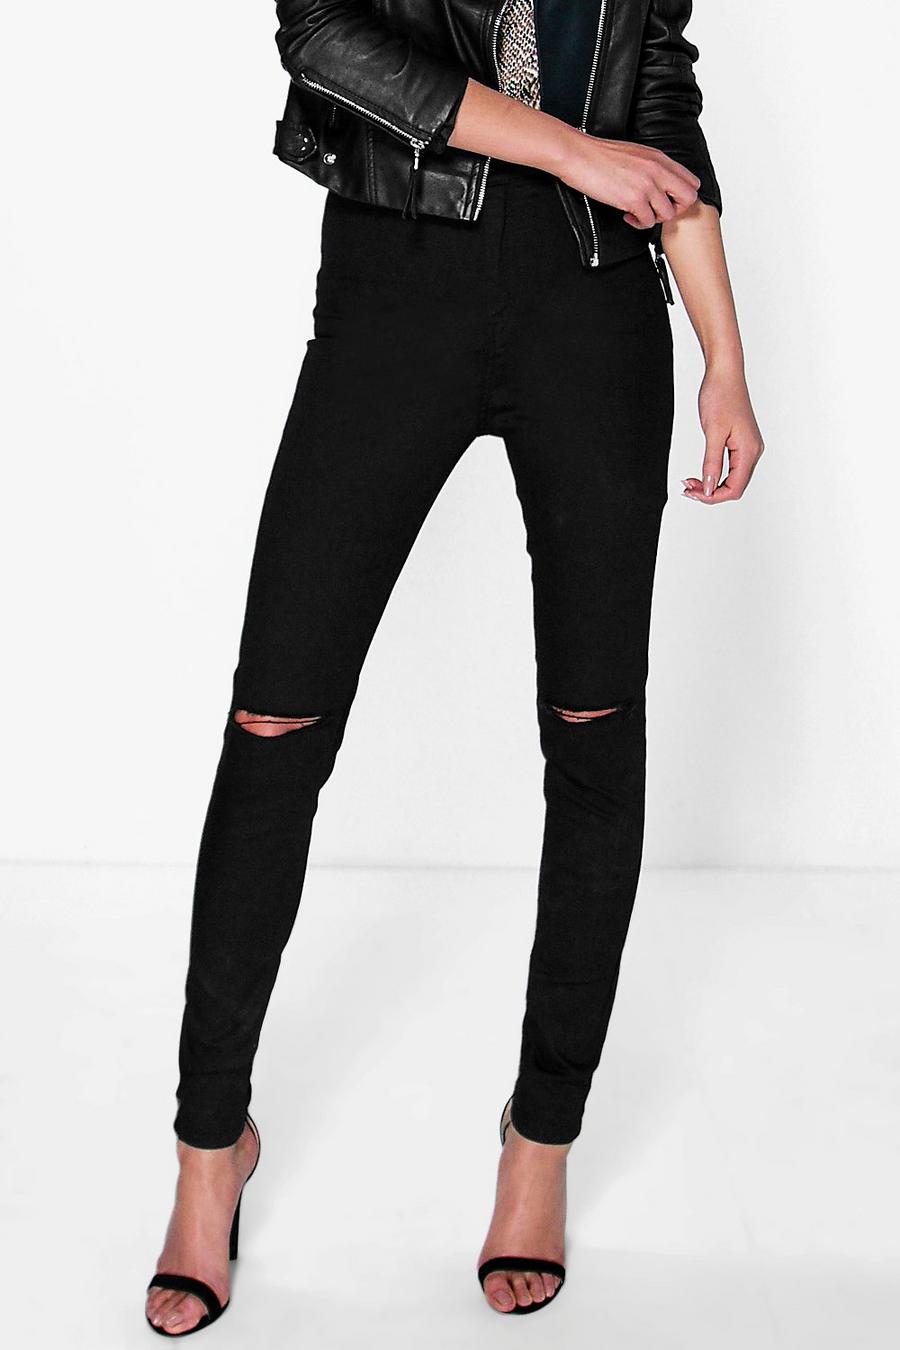 Black High Waisted Knee Rip Jeans image number 1